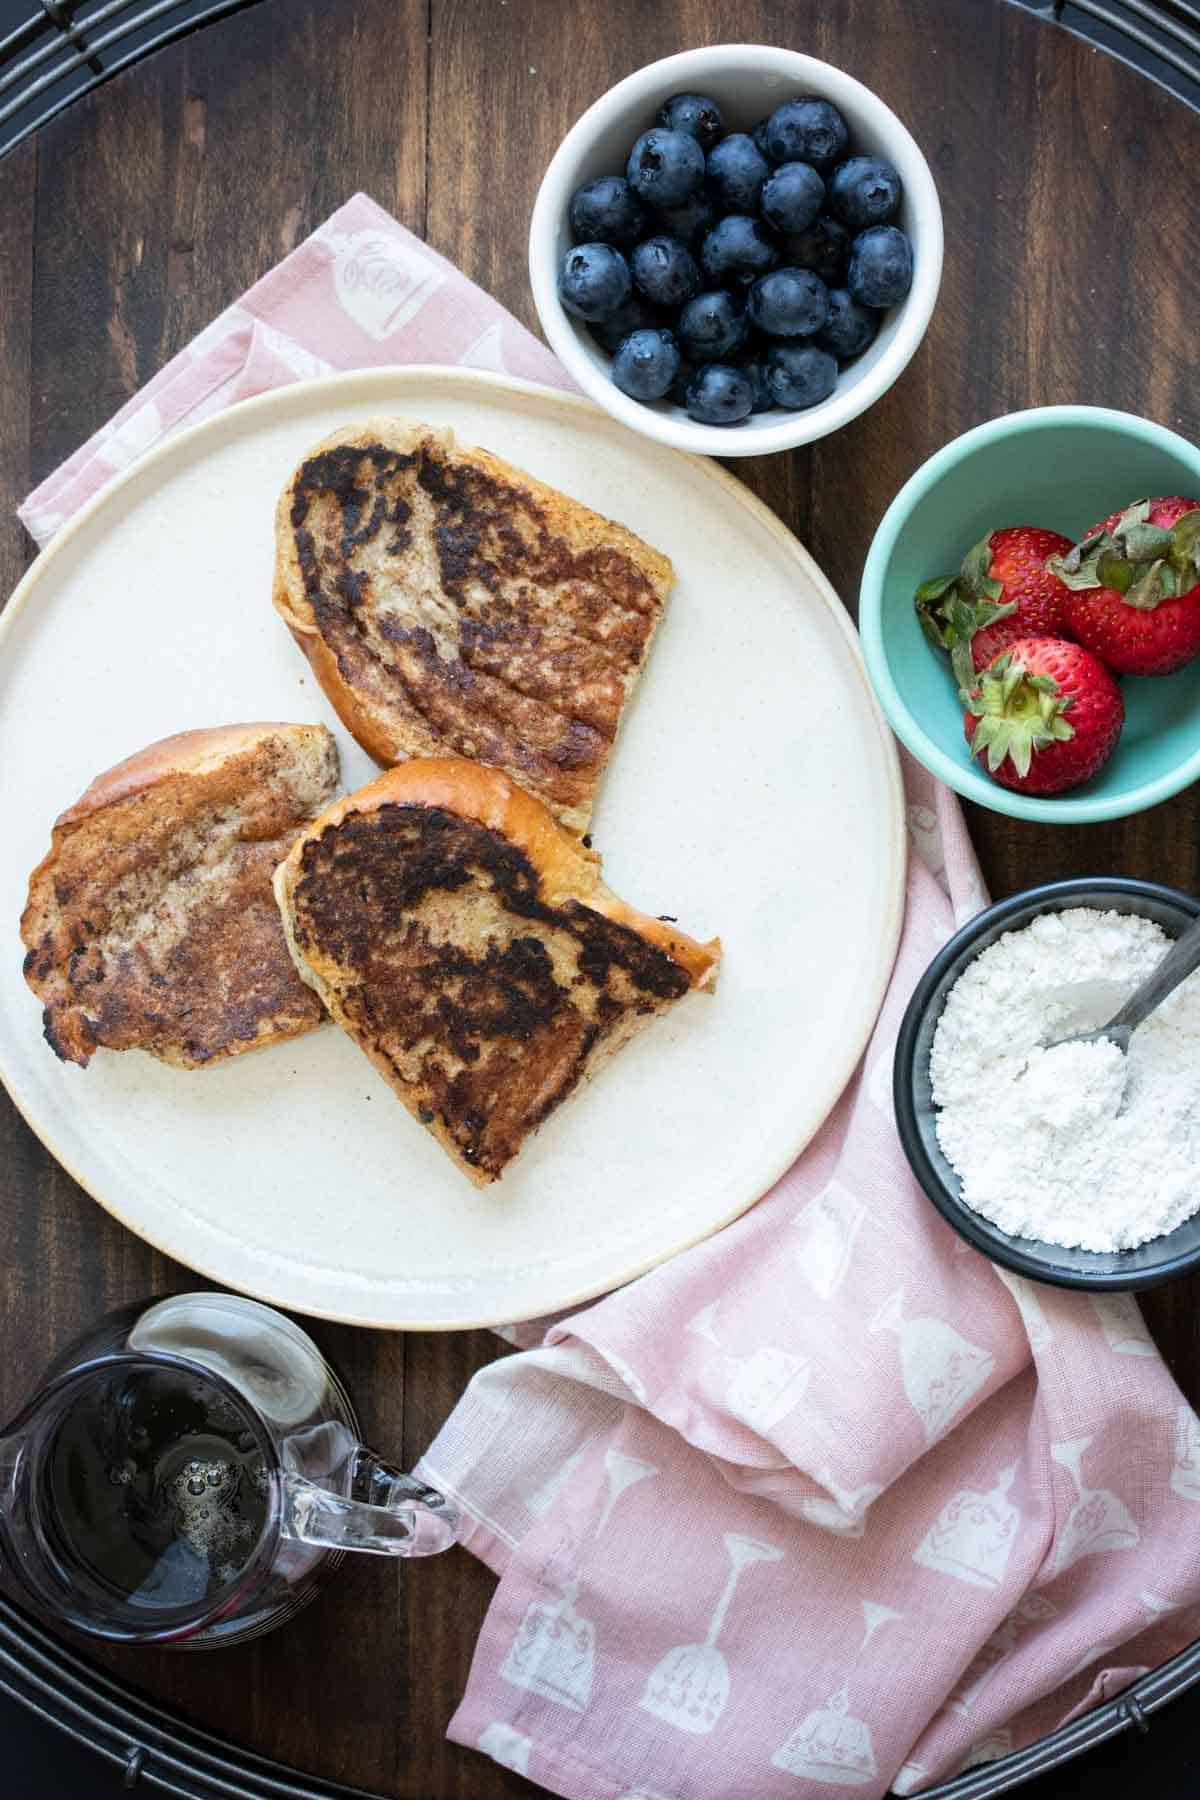 Three pieces of dry French toast on a cream plate with bowls of toppings